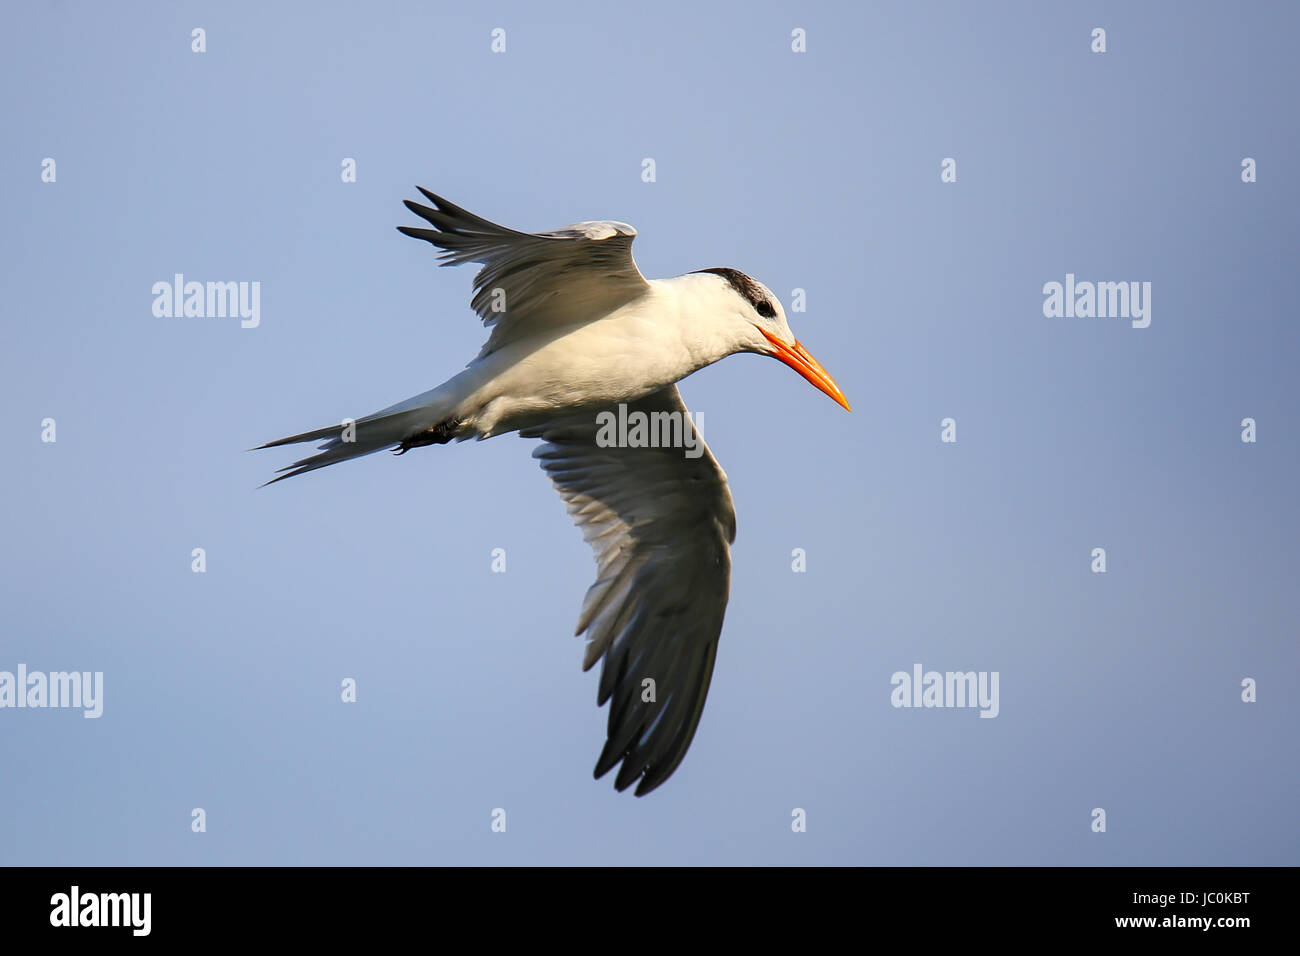 Royal tern (Thalasseus maximus) flying above Paracas Bay, Peru. Paracas Bay is well known for its abundant wildlife. Stock Photo